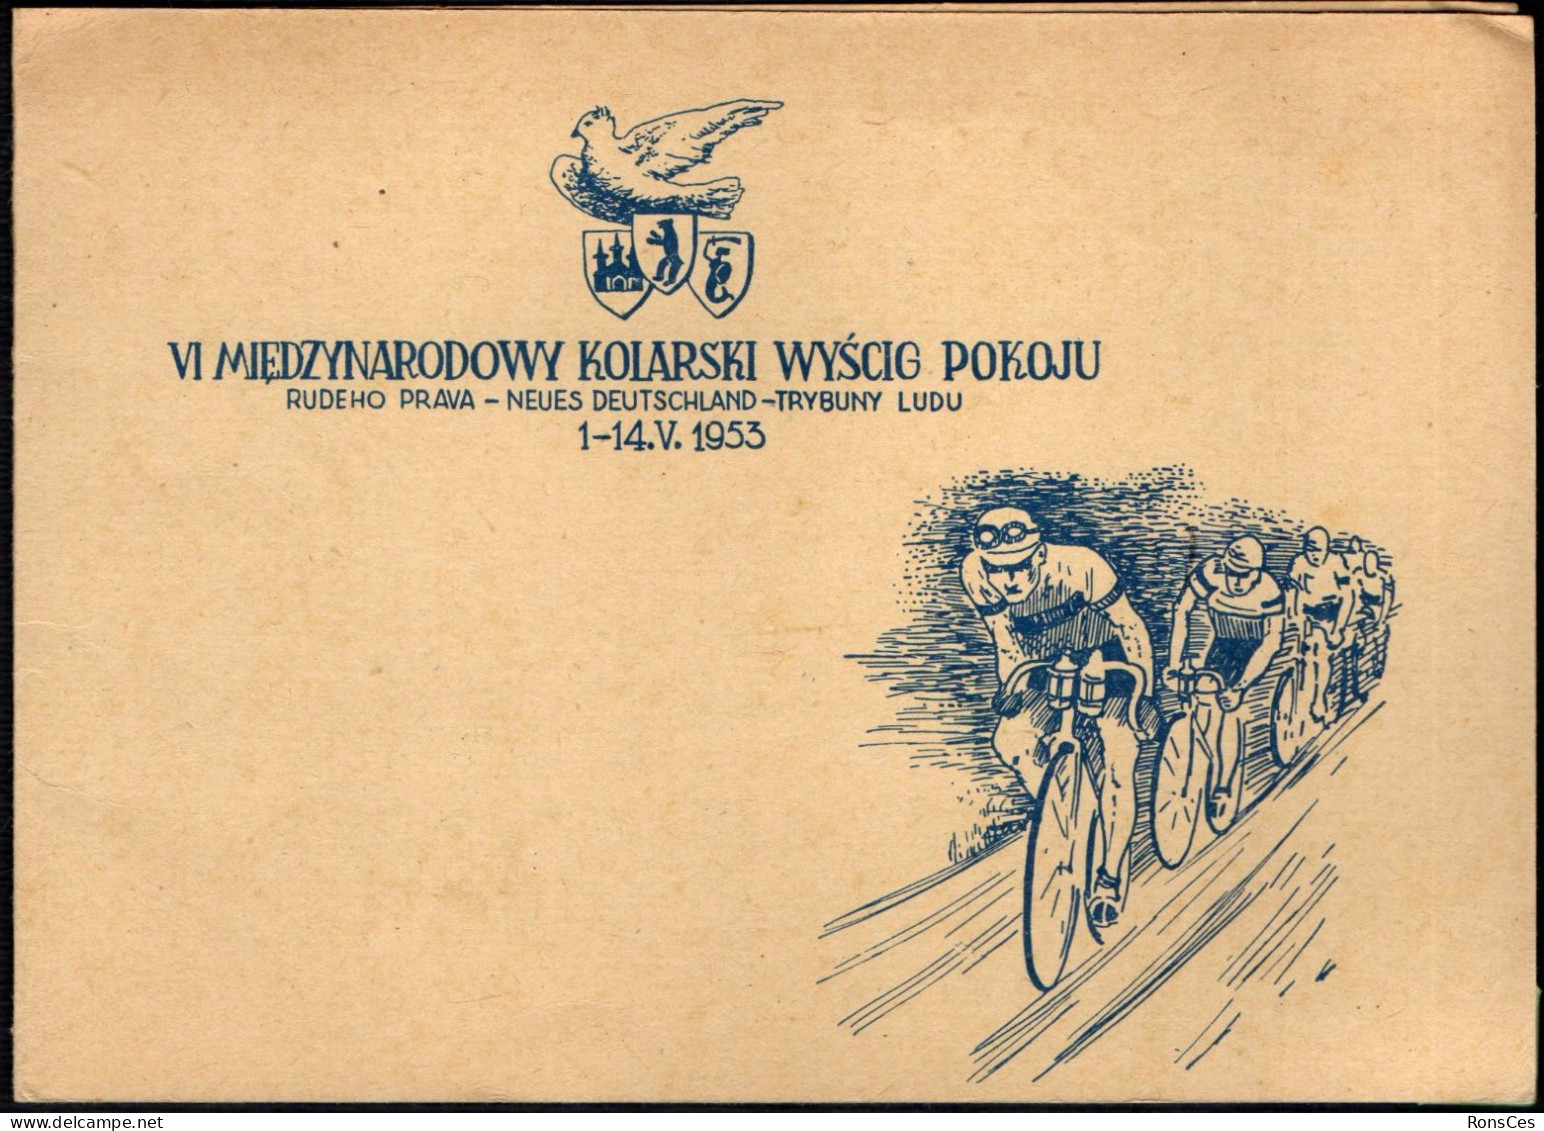 CYCLING - POLAND 1953 - THE INTERNATIONAL CYCLING RACE OF PEACE - SMALL FOLDER - A - Cycling